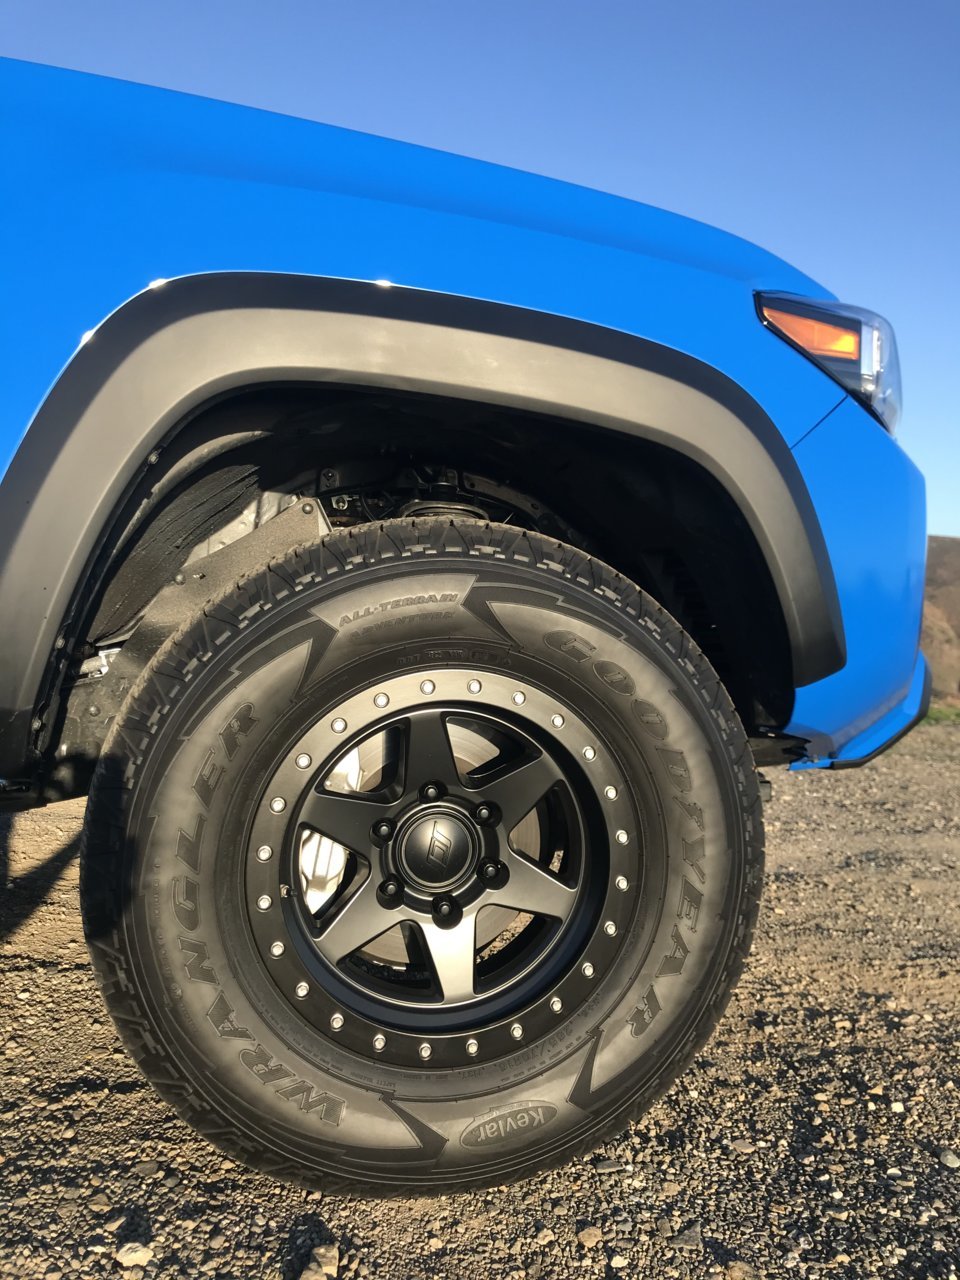 SCS BR6 wheels 16x8, 17x8.5, & 17x9 | Page 3 | Tacoma World